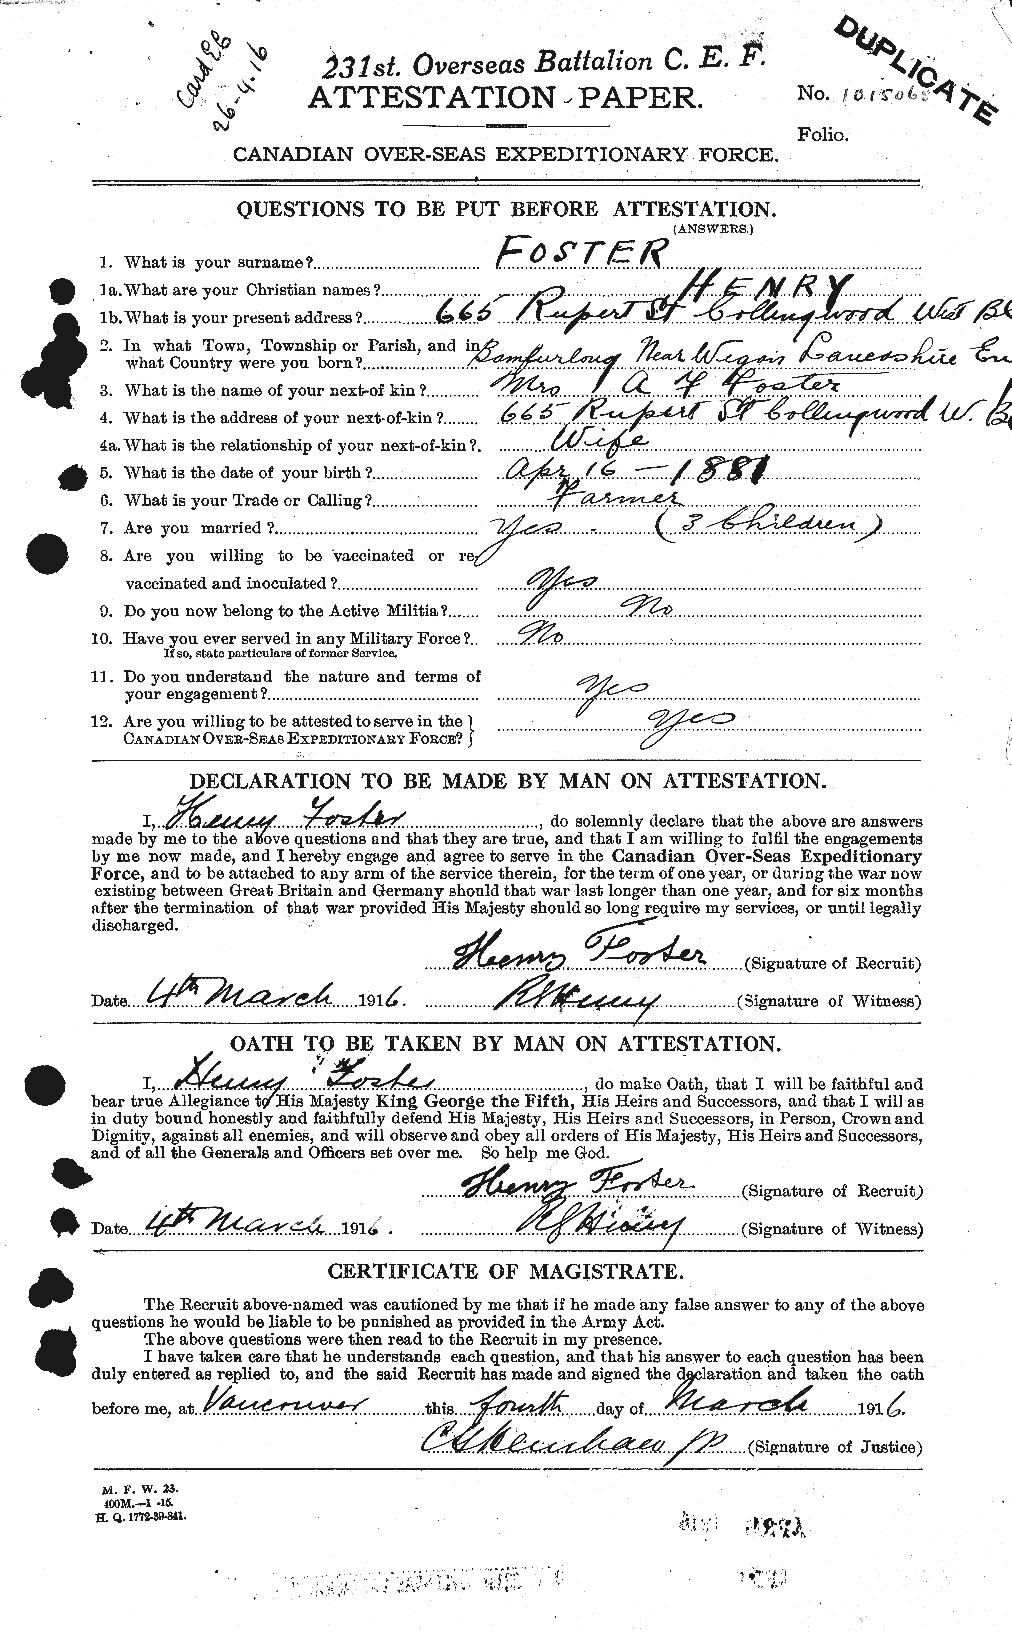 Personnel Records of the First World War - CEF 333246a